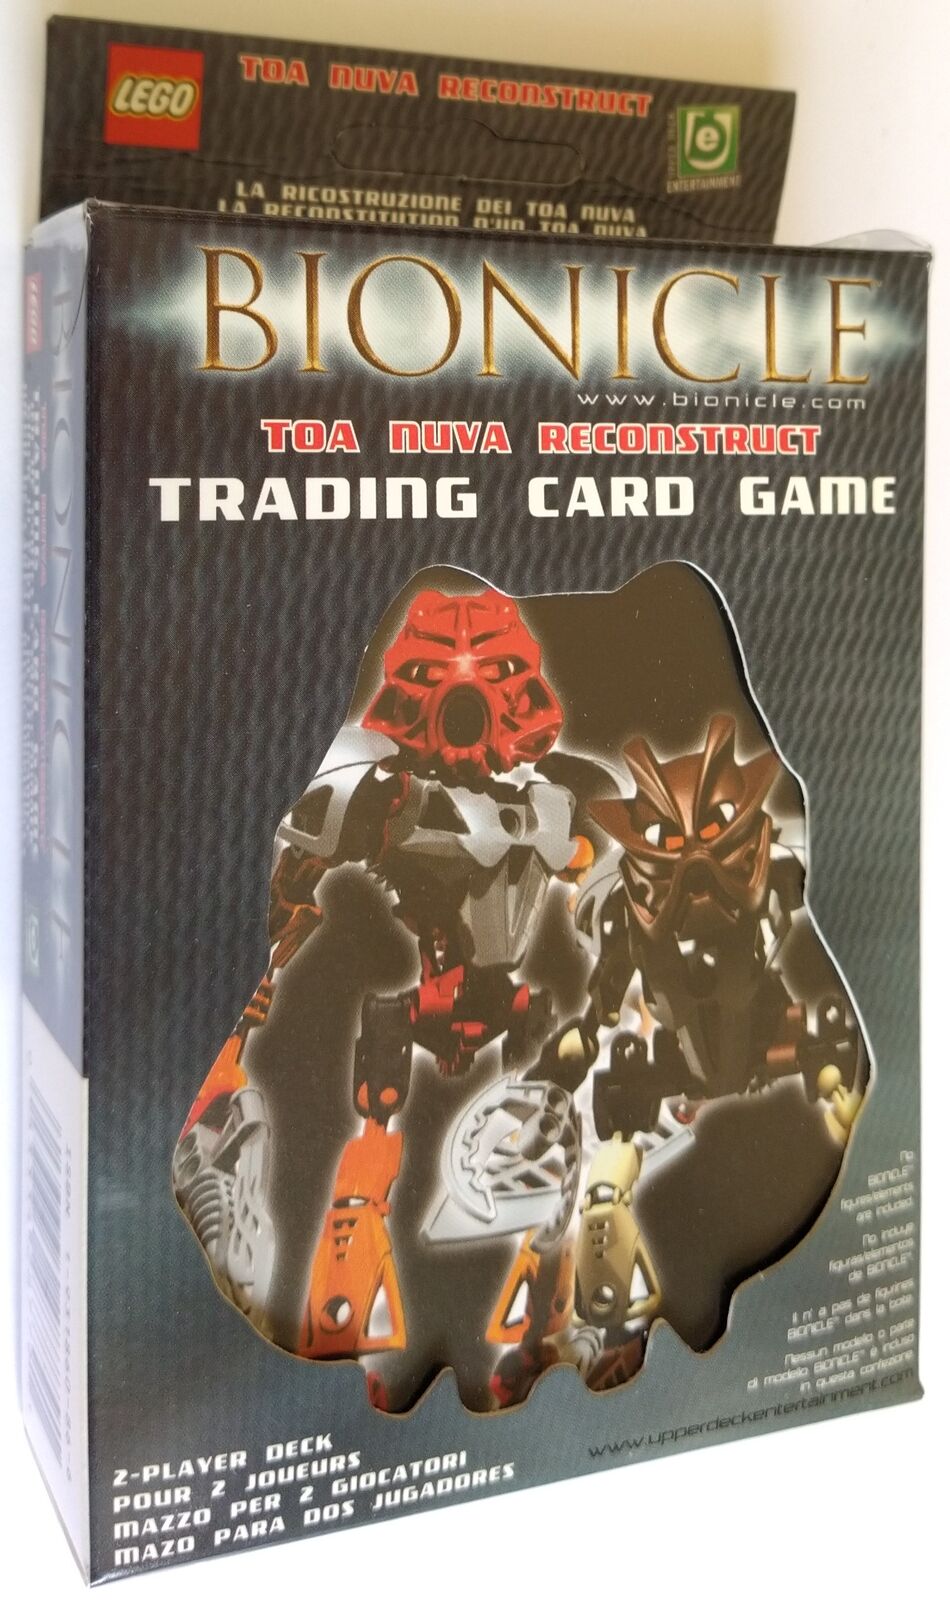 LEGO Bionicle TCG Cards Toa Nuva Reconstruct 2-Player Deck Red Deck